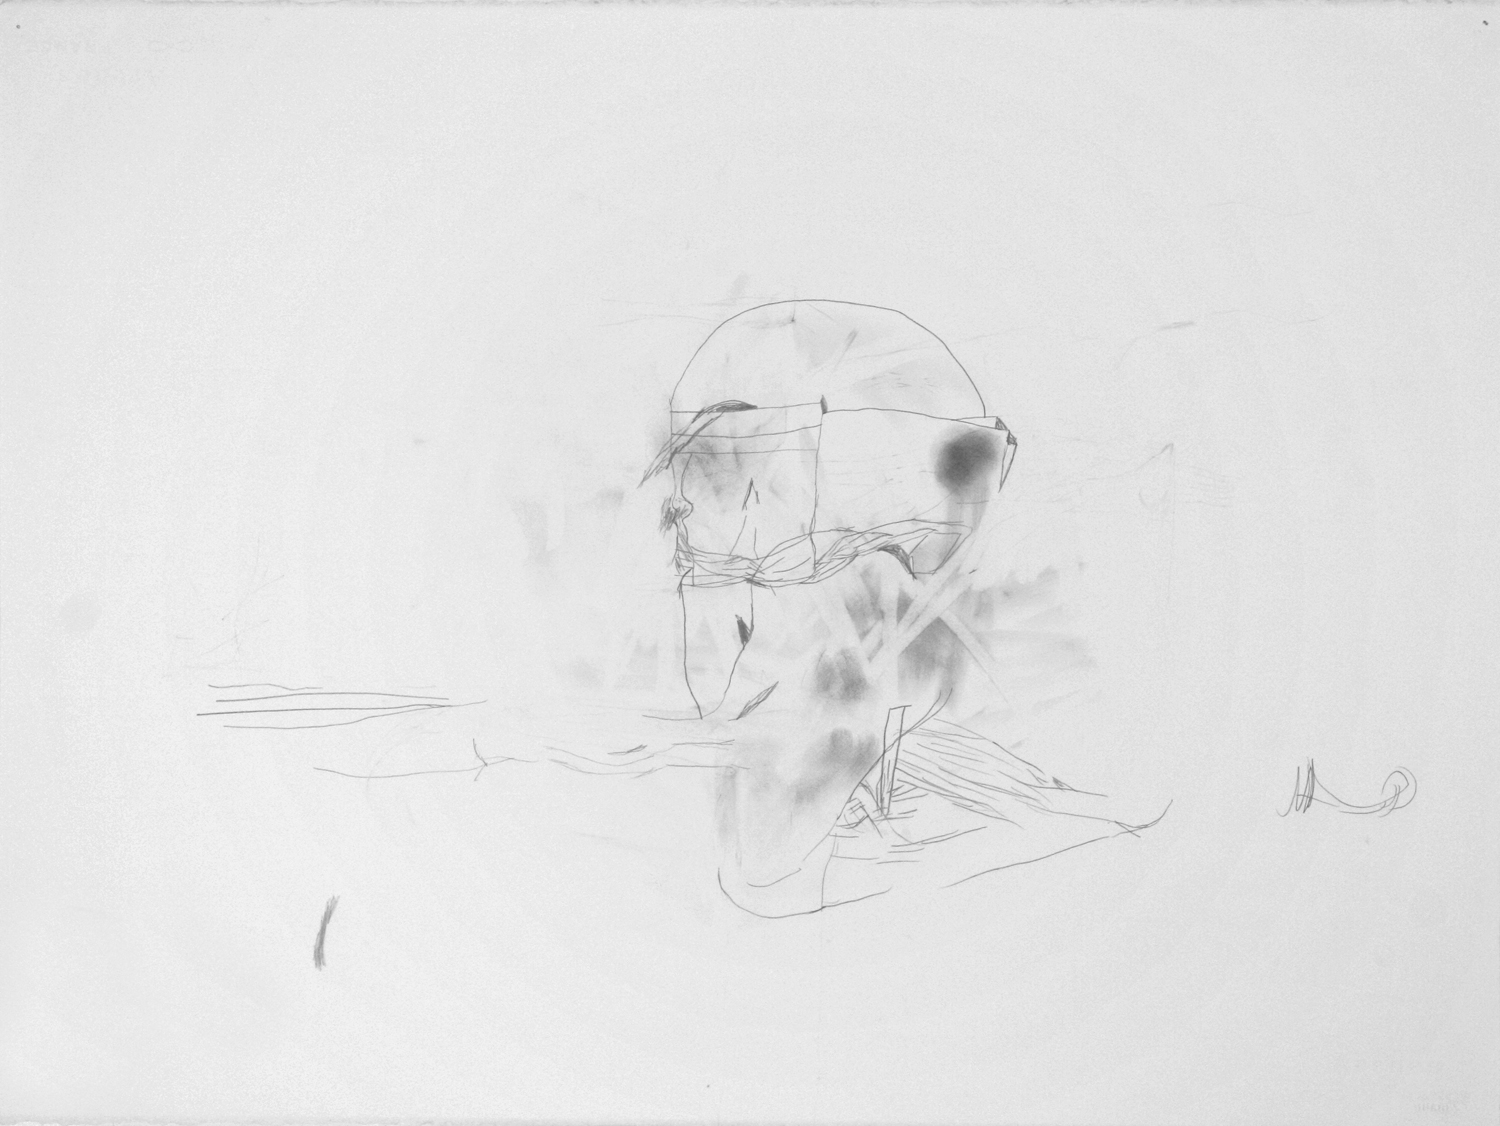  Untitled, 2013. 22" x 30", pencil on paper. 